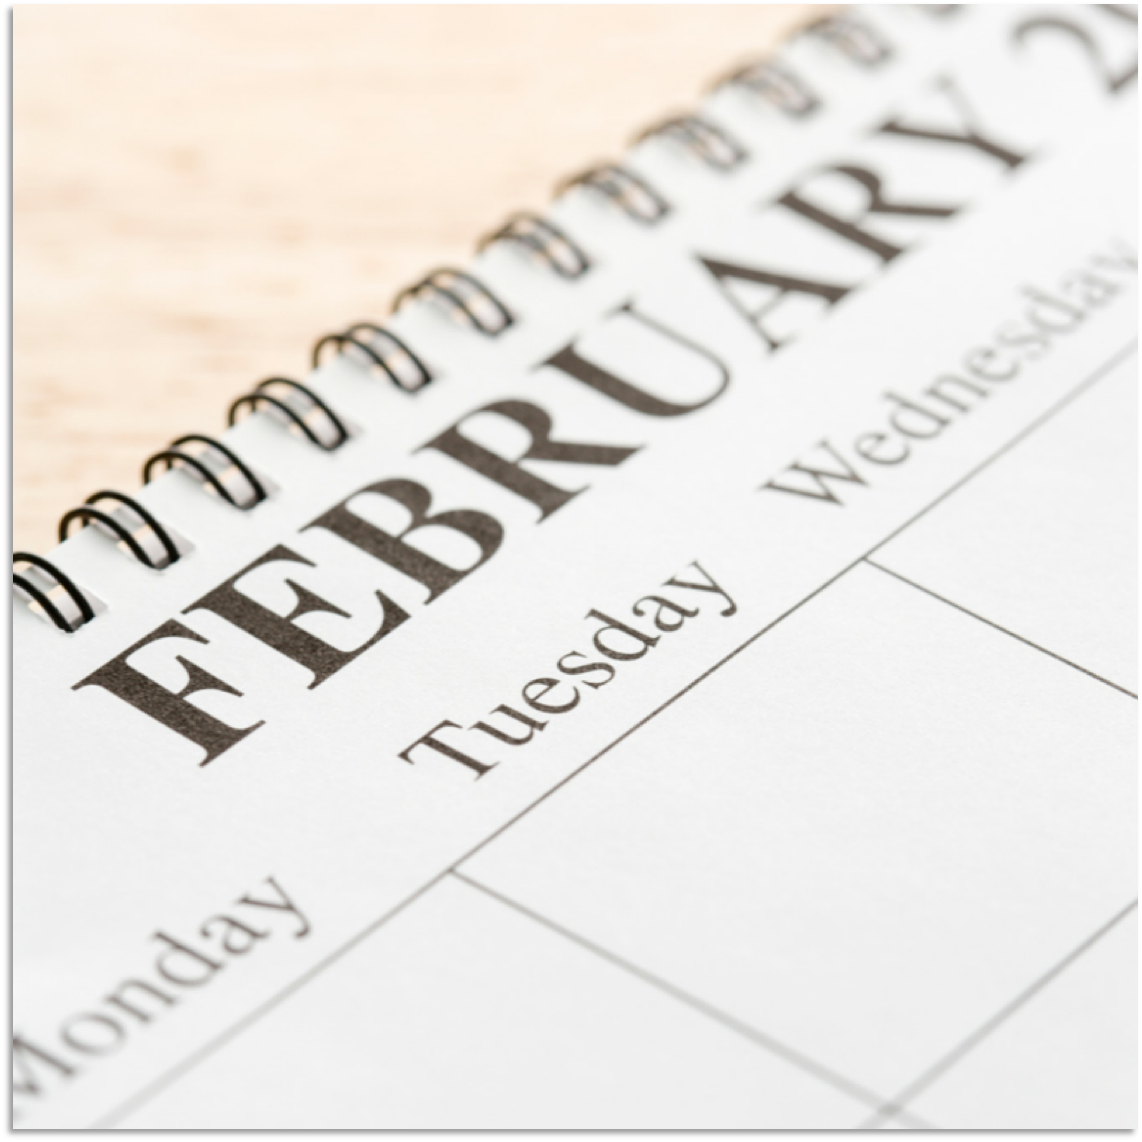 Leap Year 2016: 3 Steps to Avoiding Health IT Problems